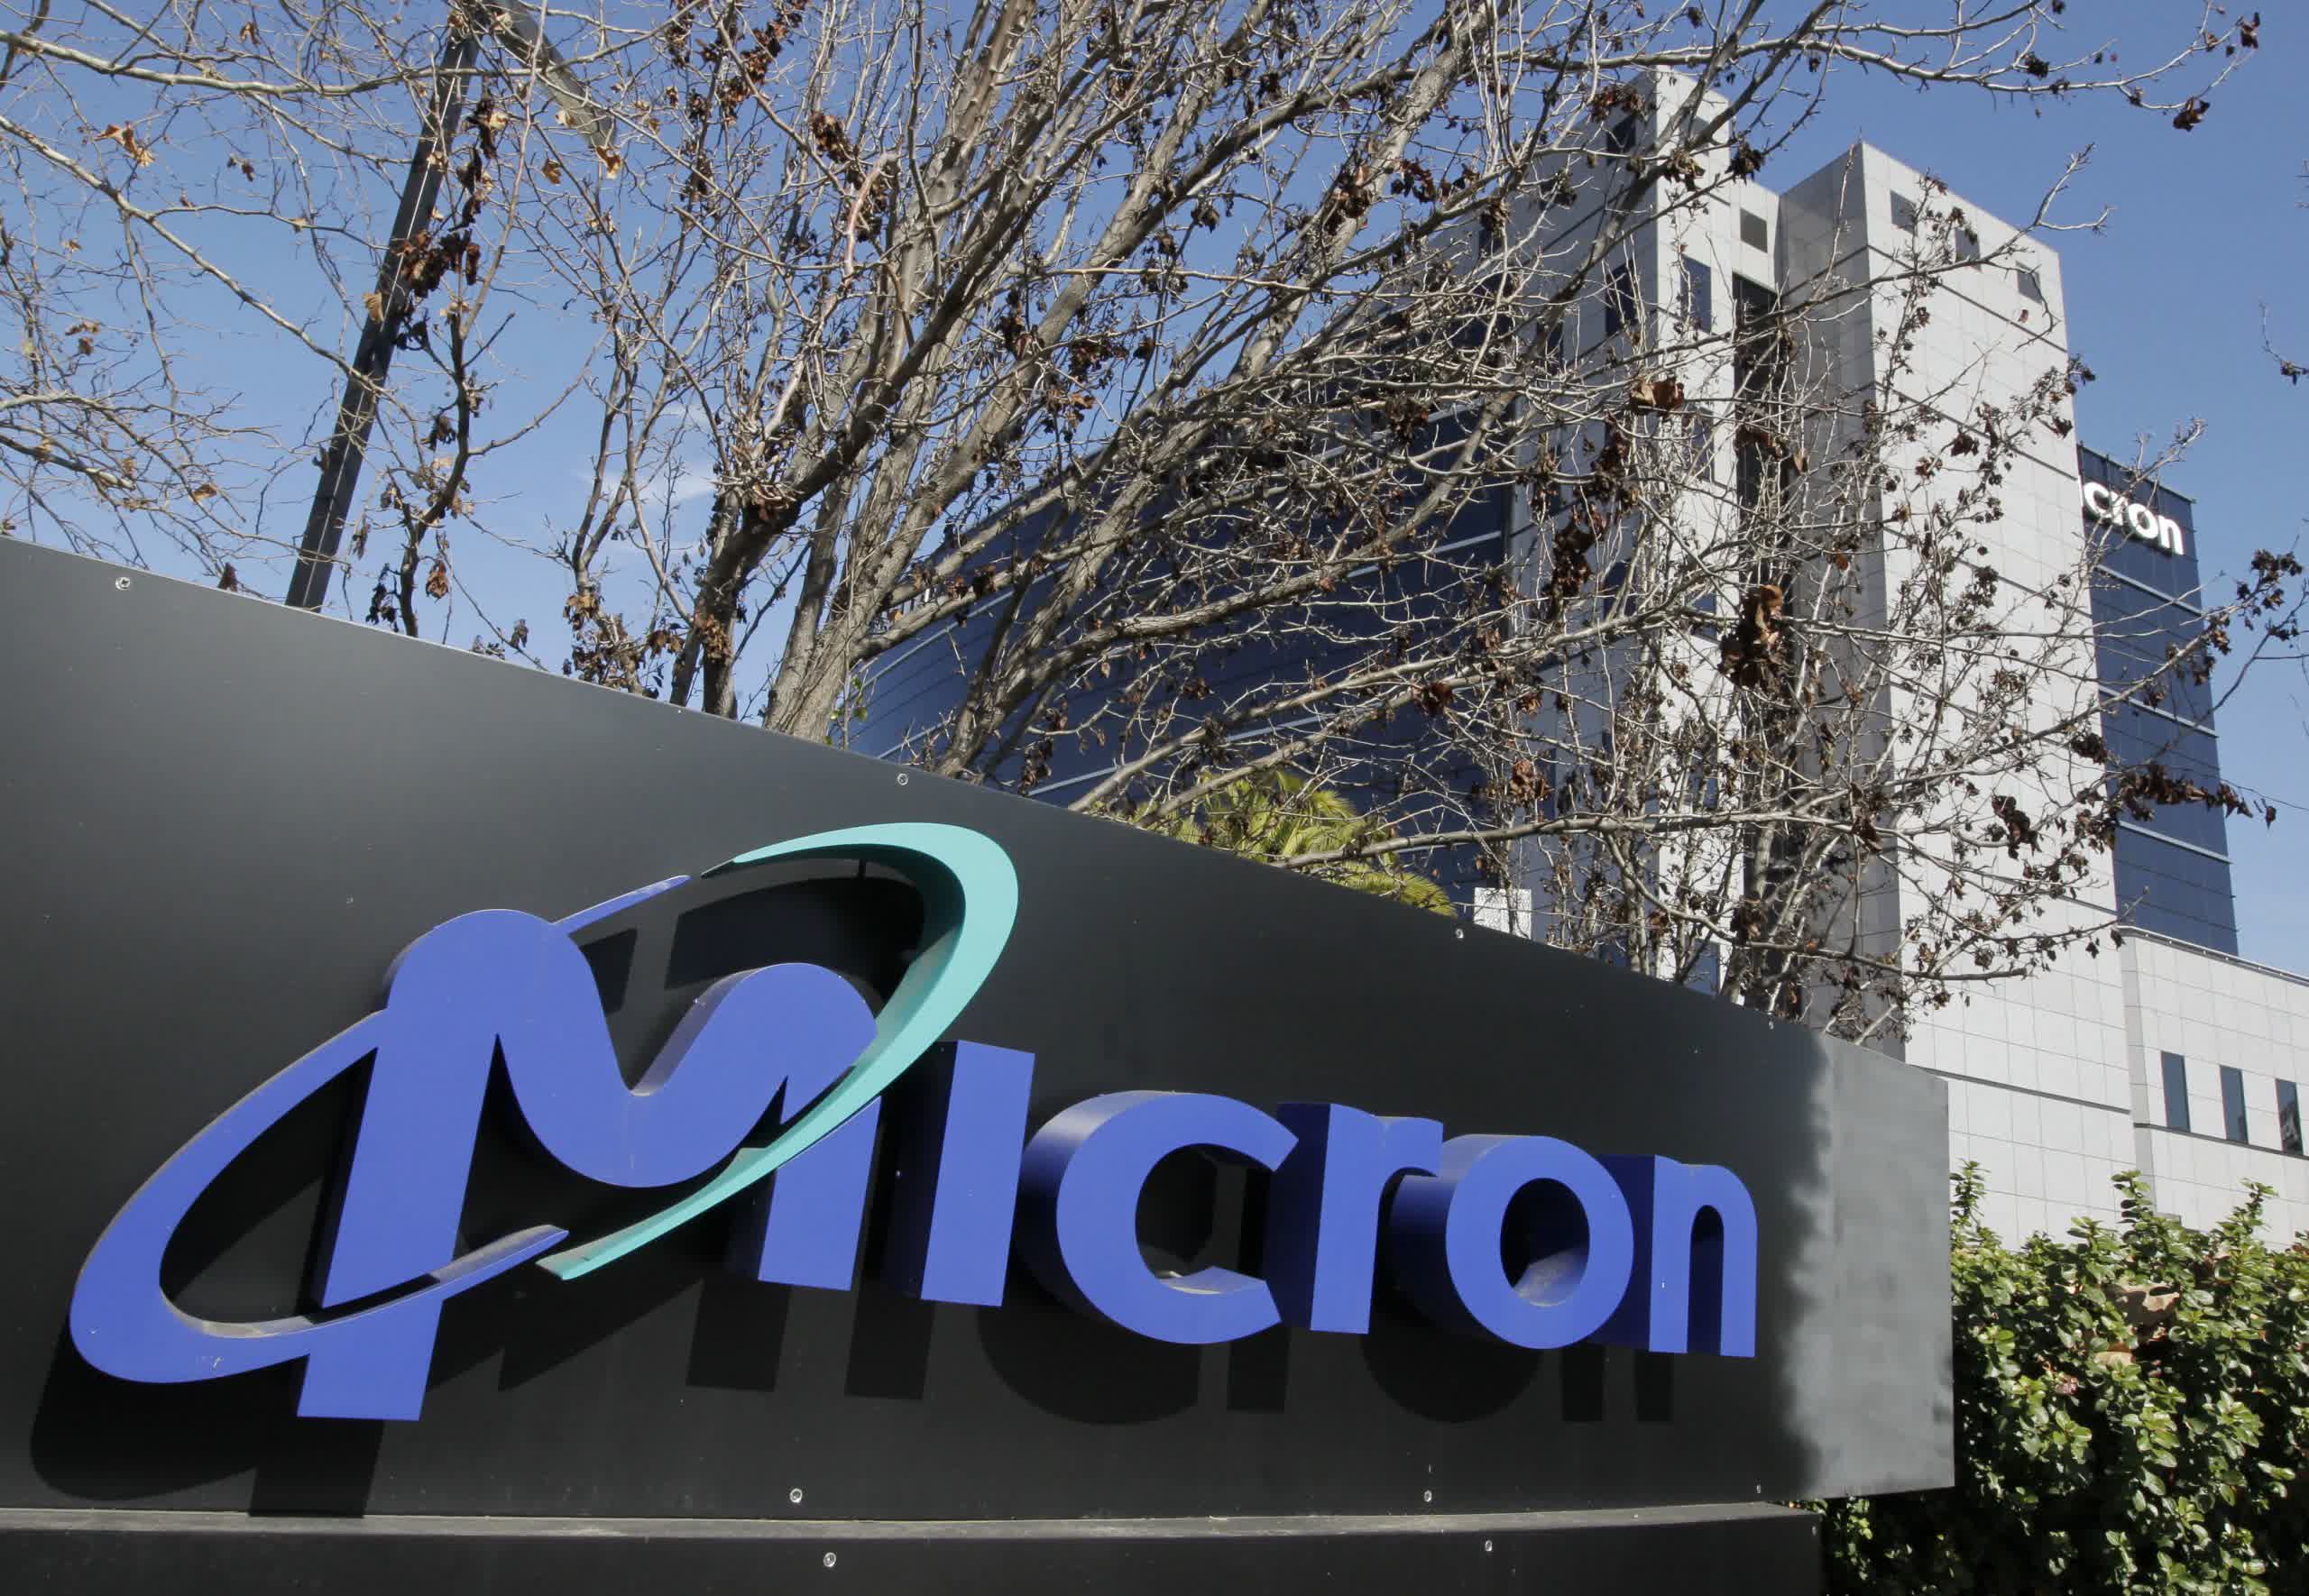 Micron is building a $7B DRAM plant in Japan, will spend up to $150B for R&D over the next decade